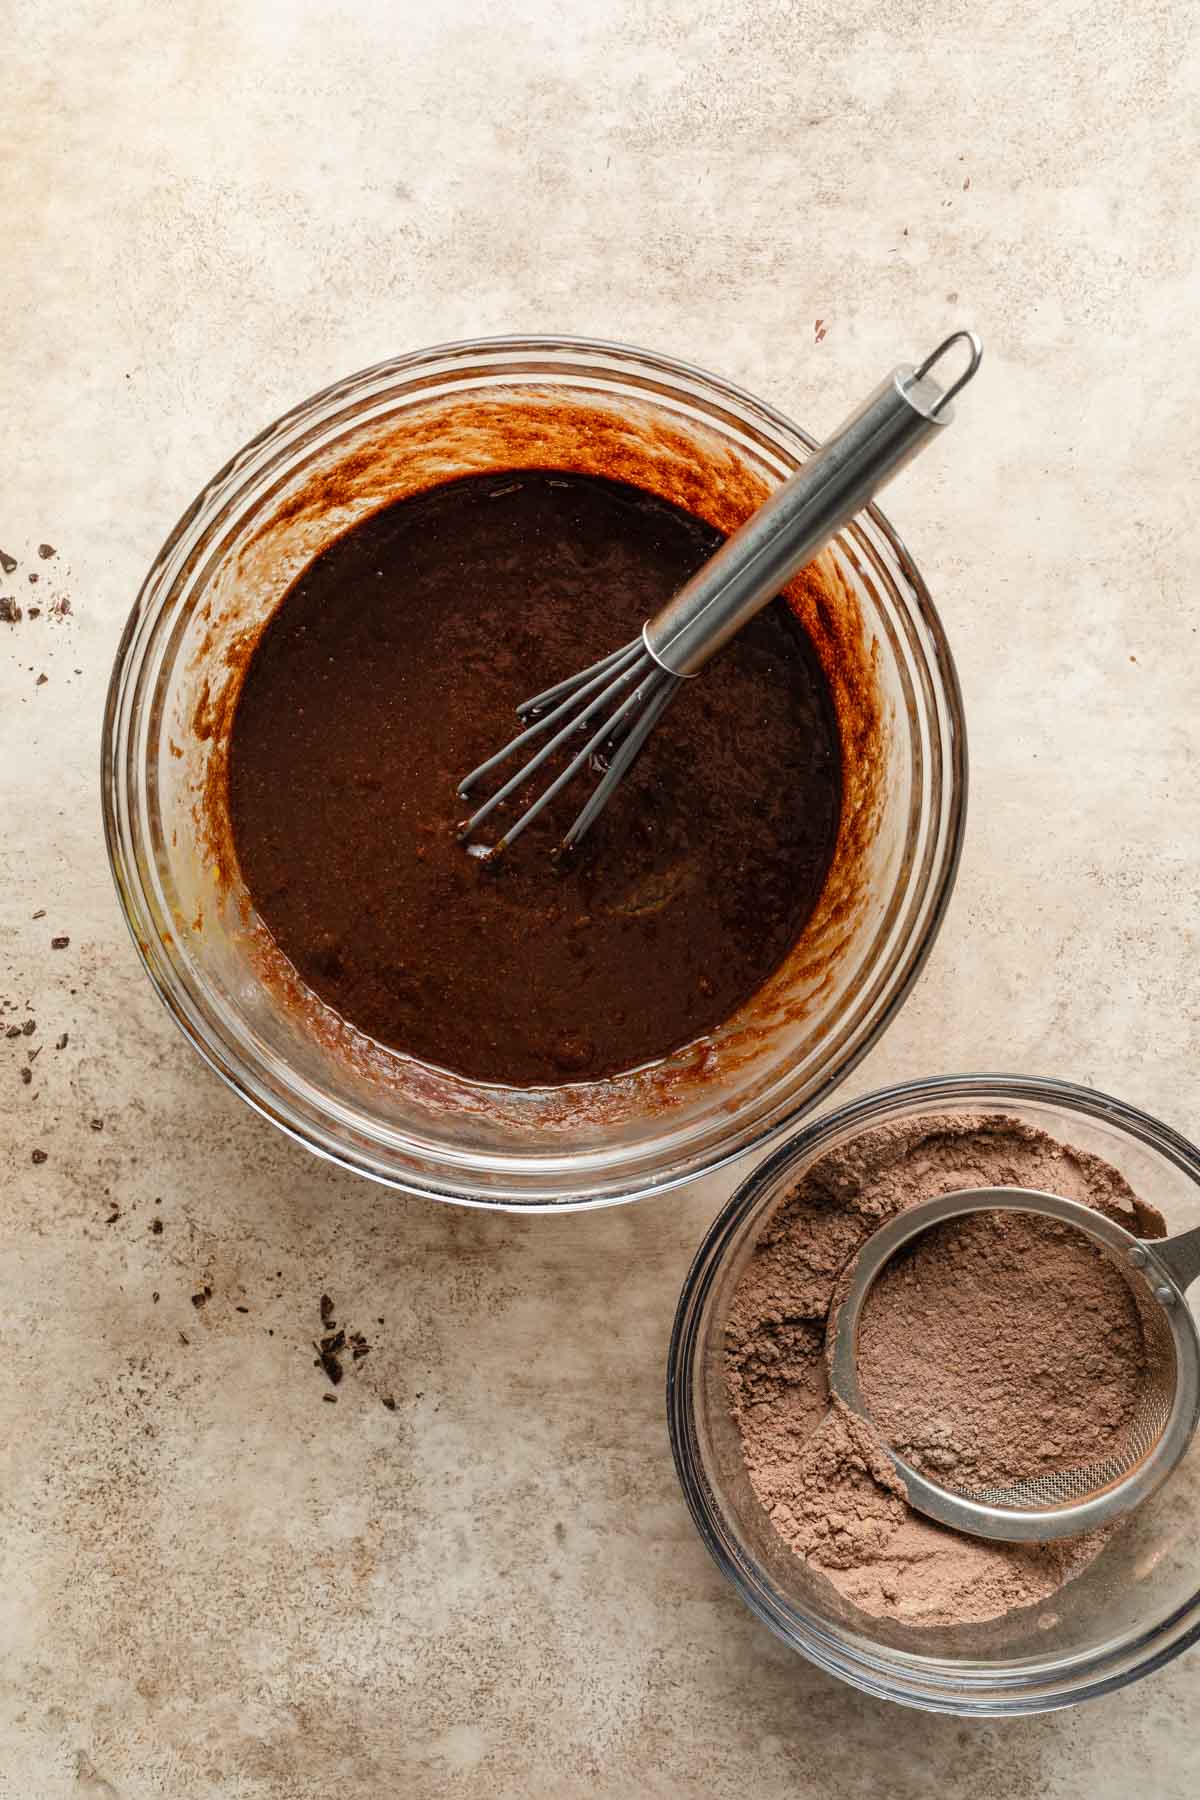 Wet chocolate mixture in a glass bowl next to a bowl of dry ingredients.